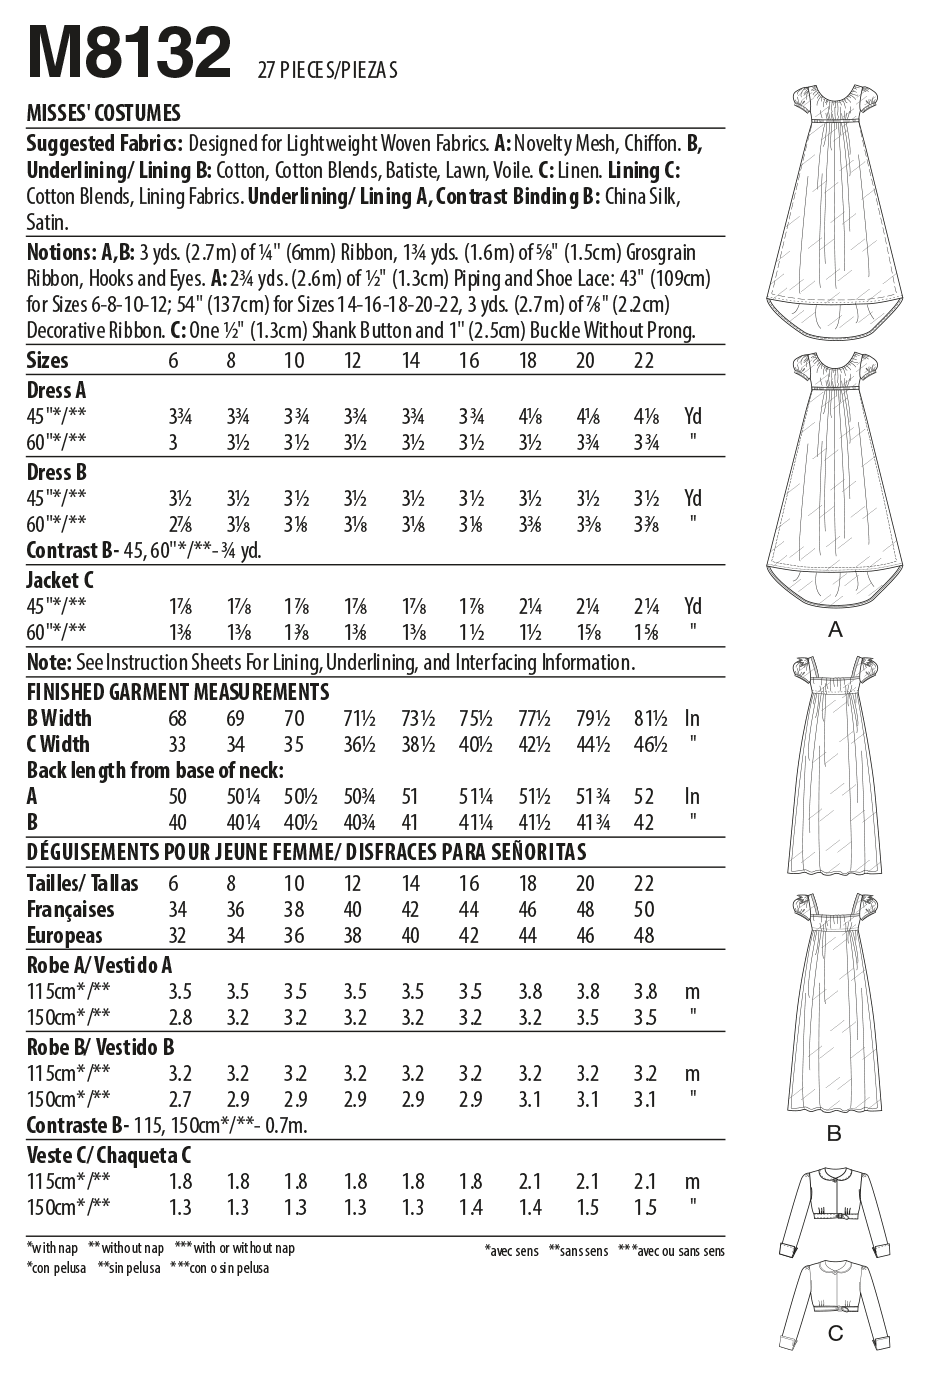 McCall's 8132 Misses' Costume Pattern | 18th century dress from Jaycotts Sewing Supplies